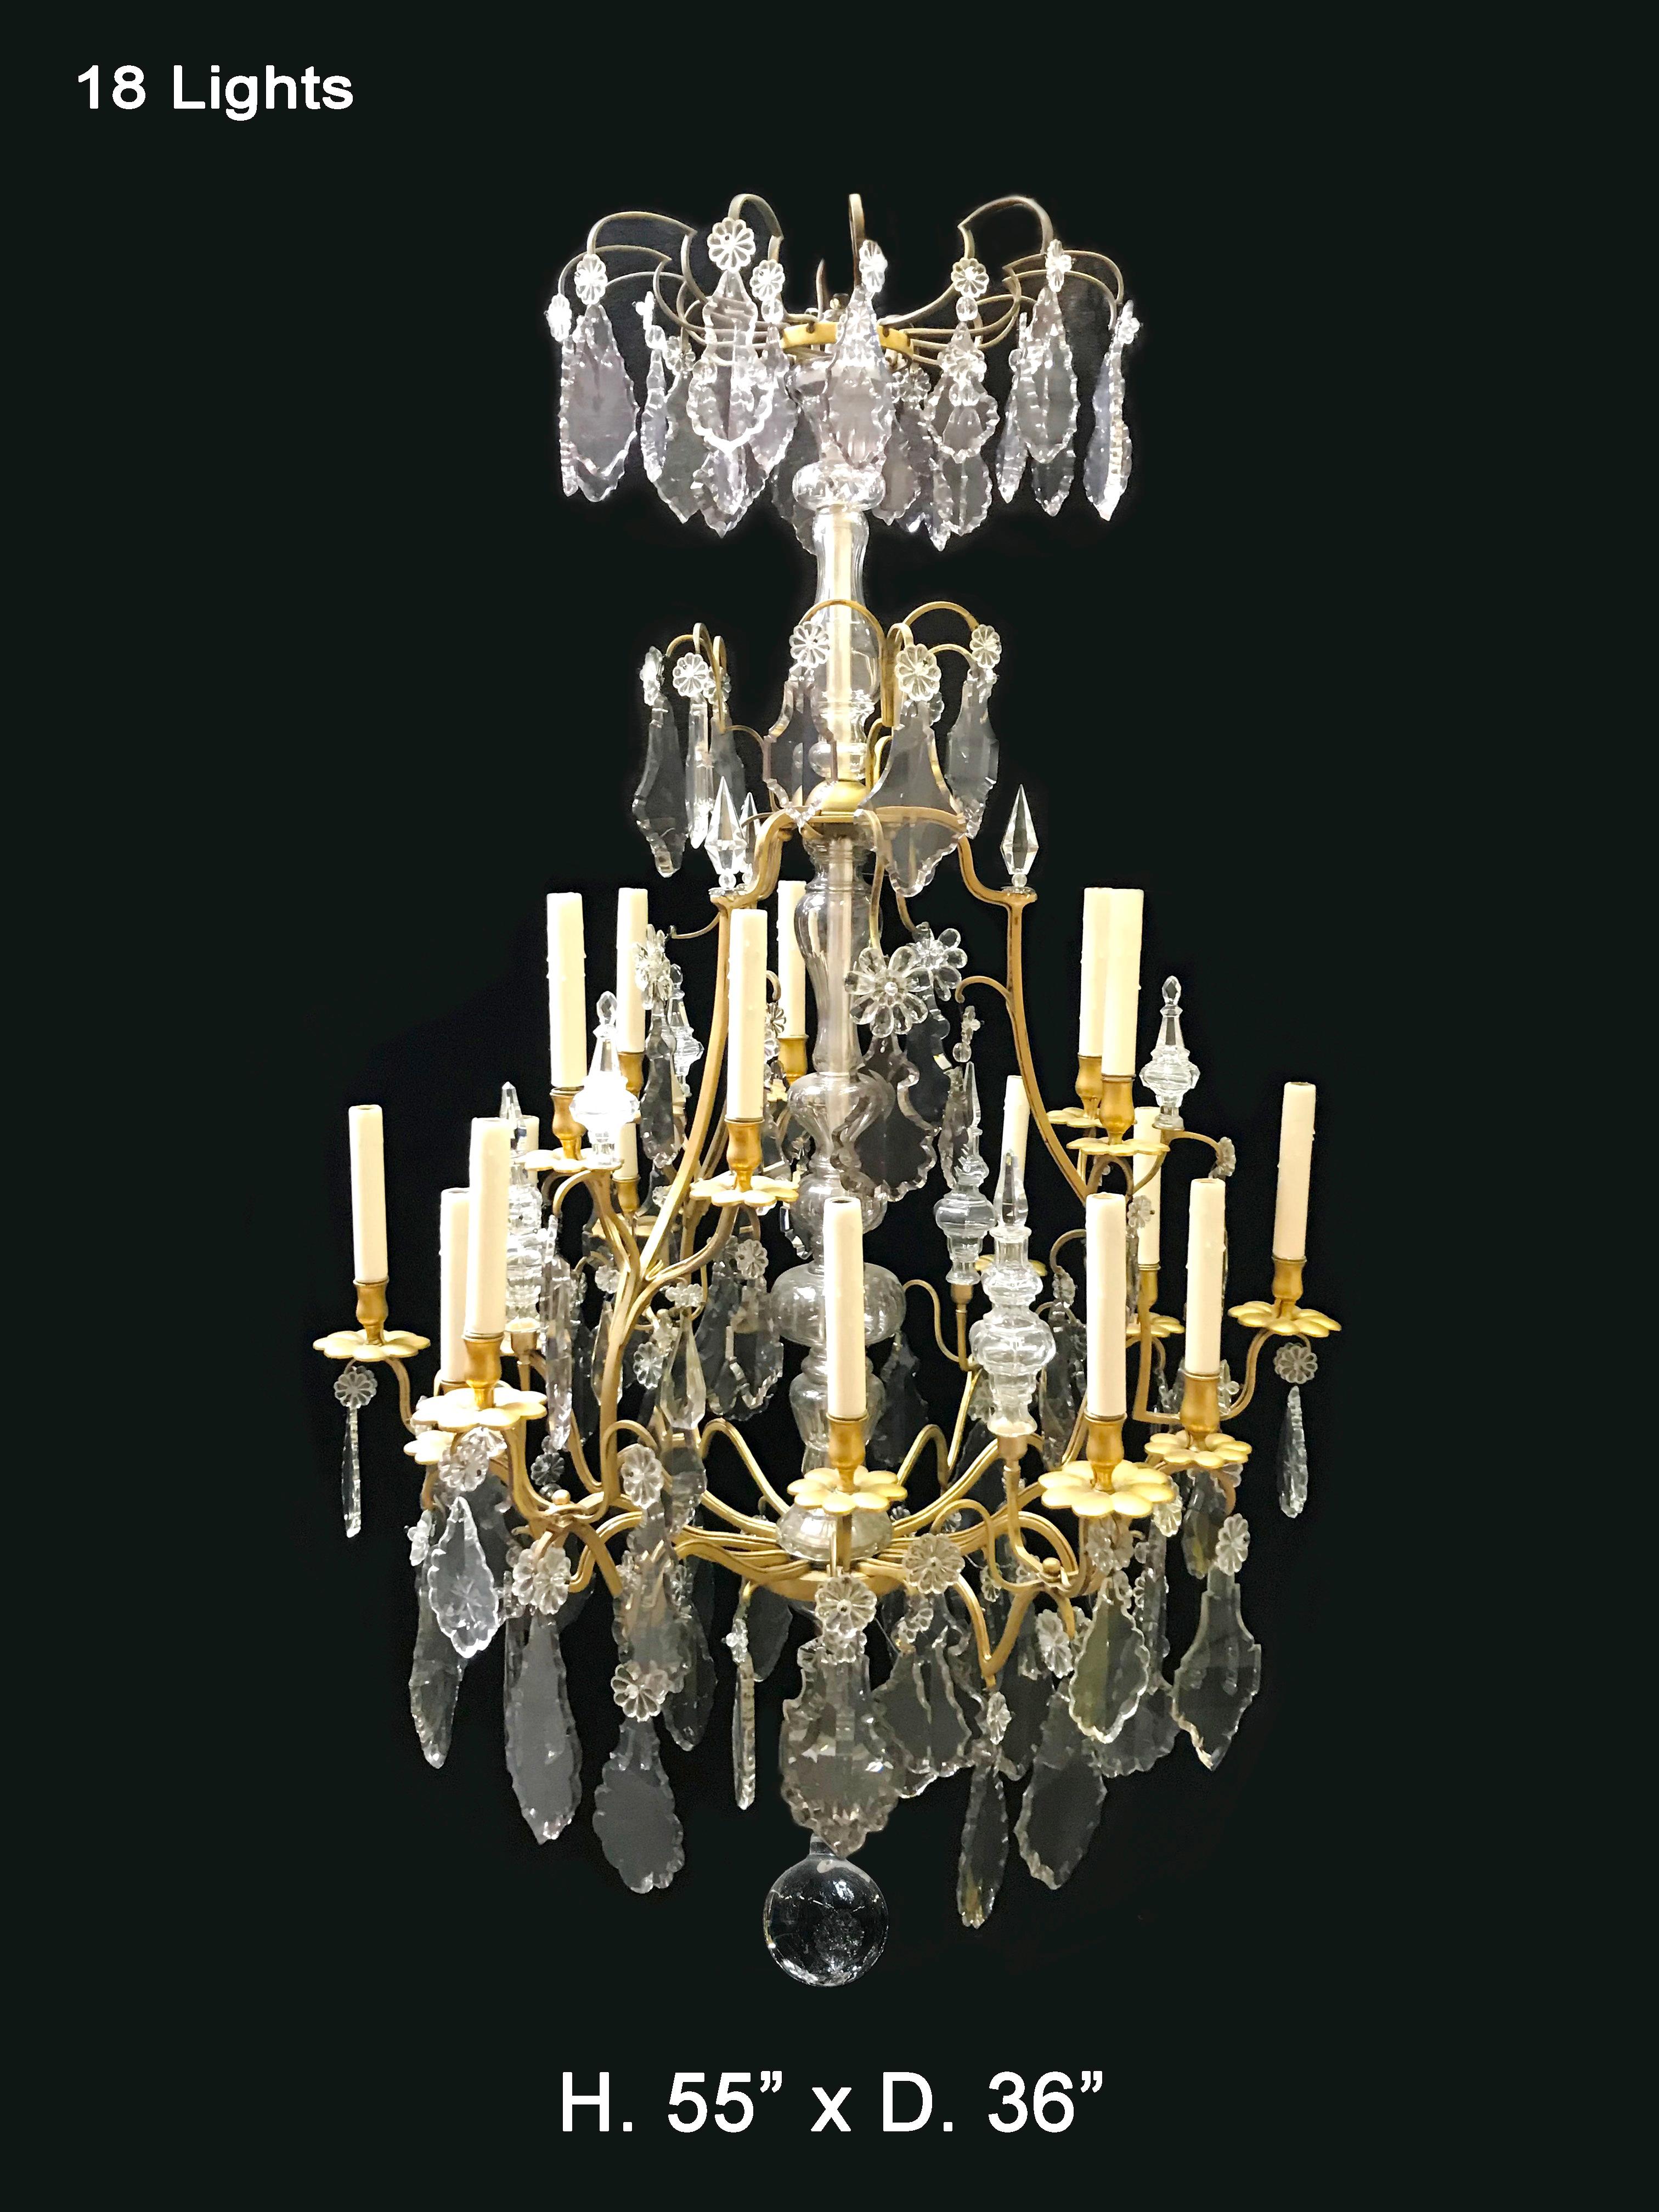 Fabulous 19 century French Louis XV style finely gilded bronze 18-light chandelier mounted with beautifully cut crystal prisms and spikes, possibly Baccarat.
Measures: H. 55